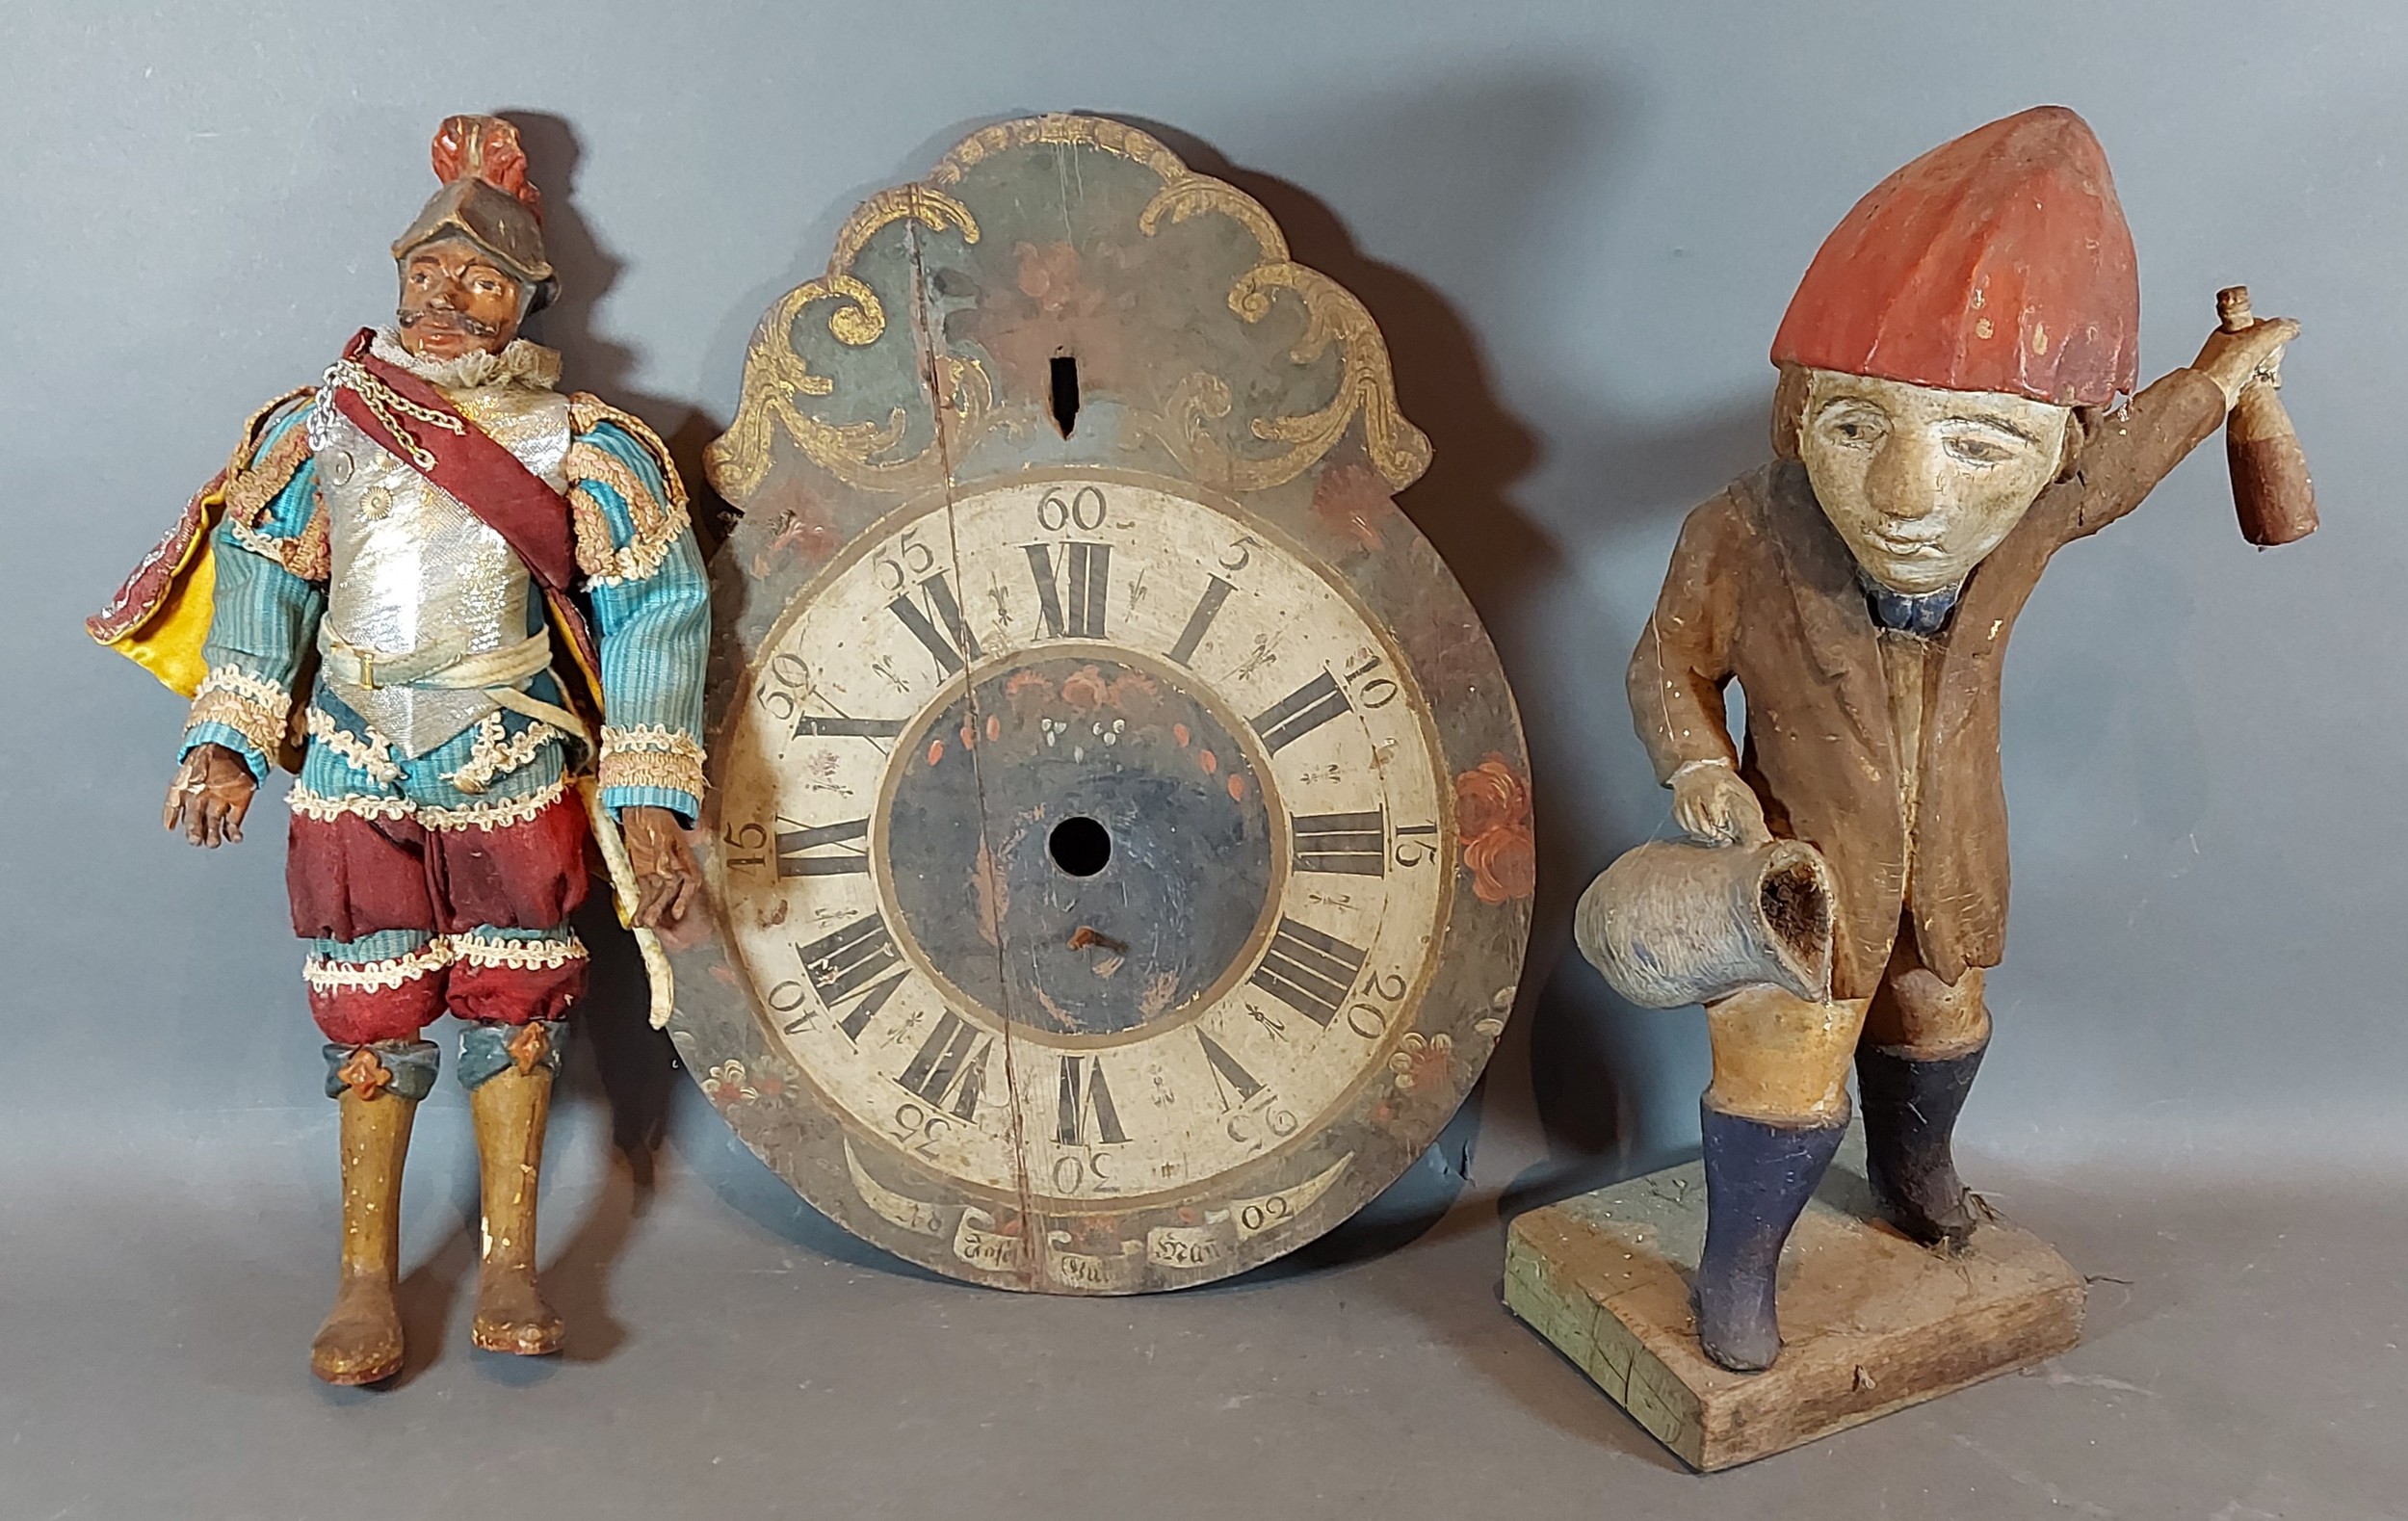 A Norwegian carved figure together with another figure and a clock face